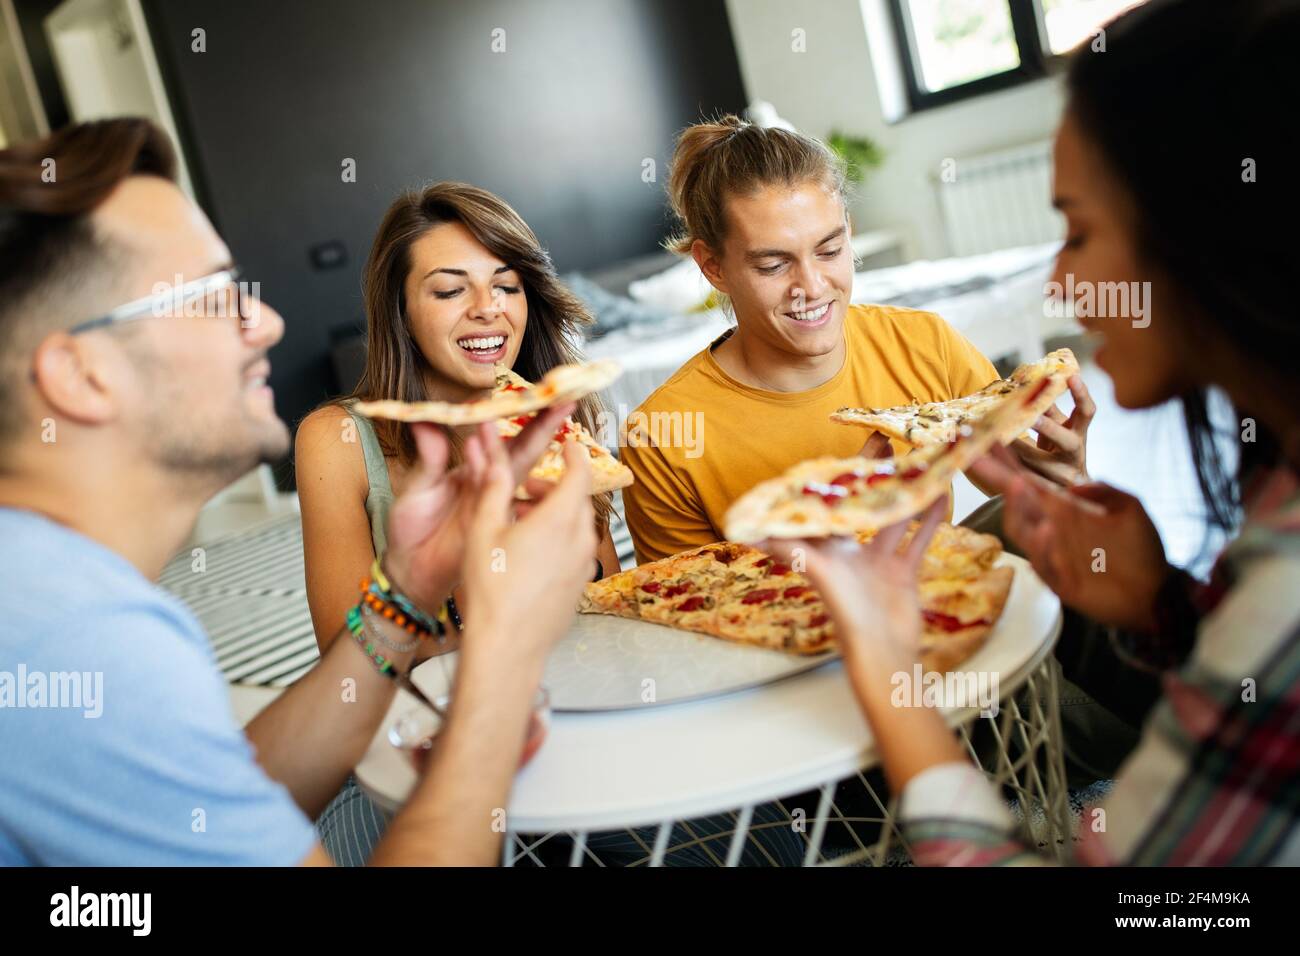 Spending time with friends. Group of cheerful young people talking and eating pizza together Stock Photo